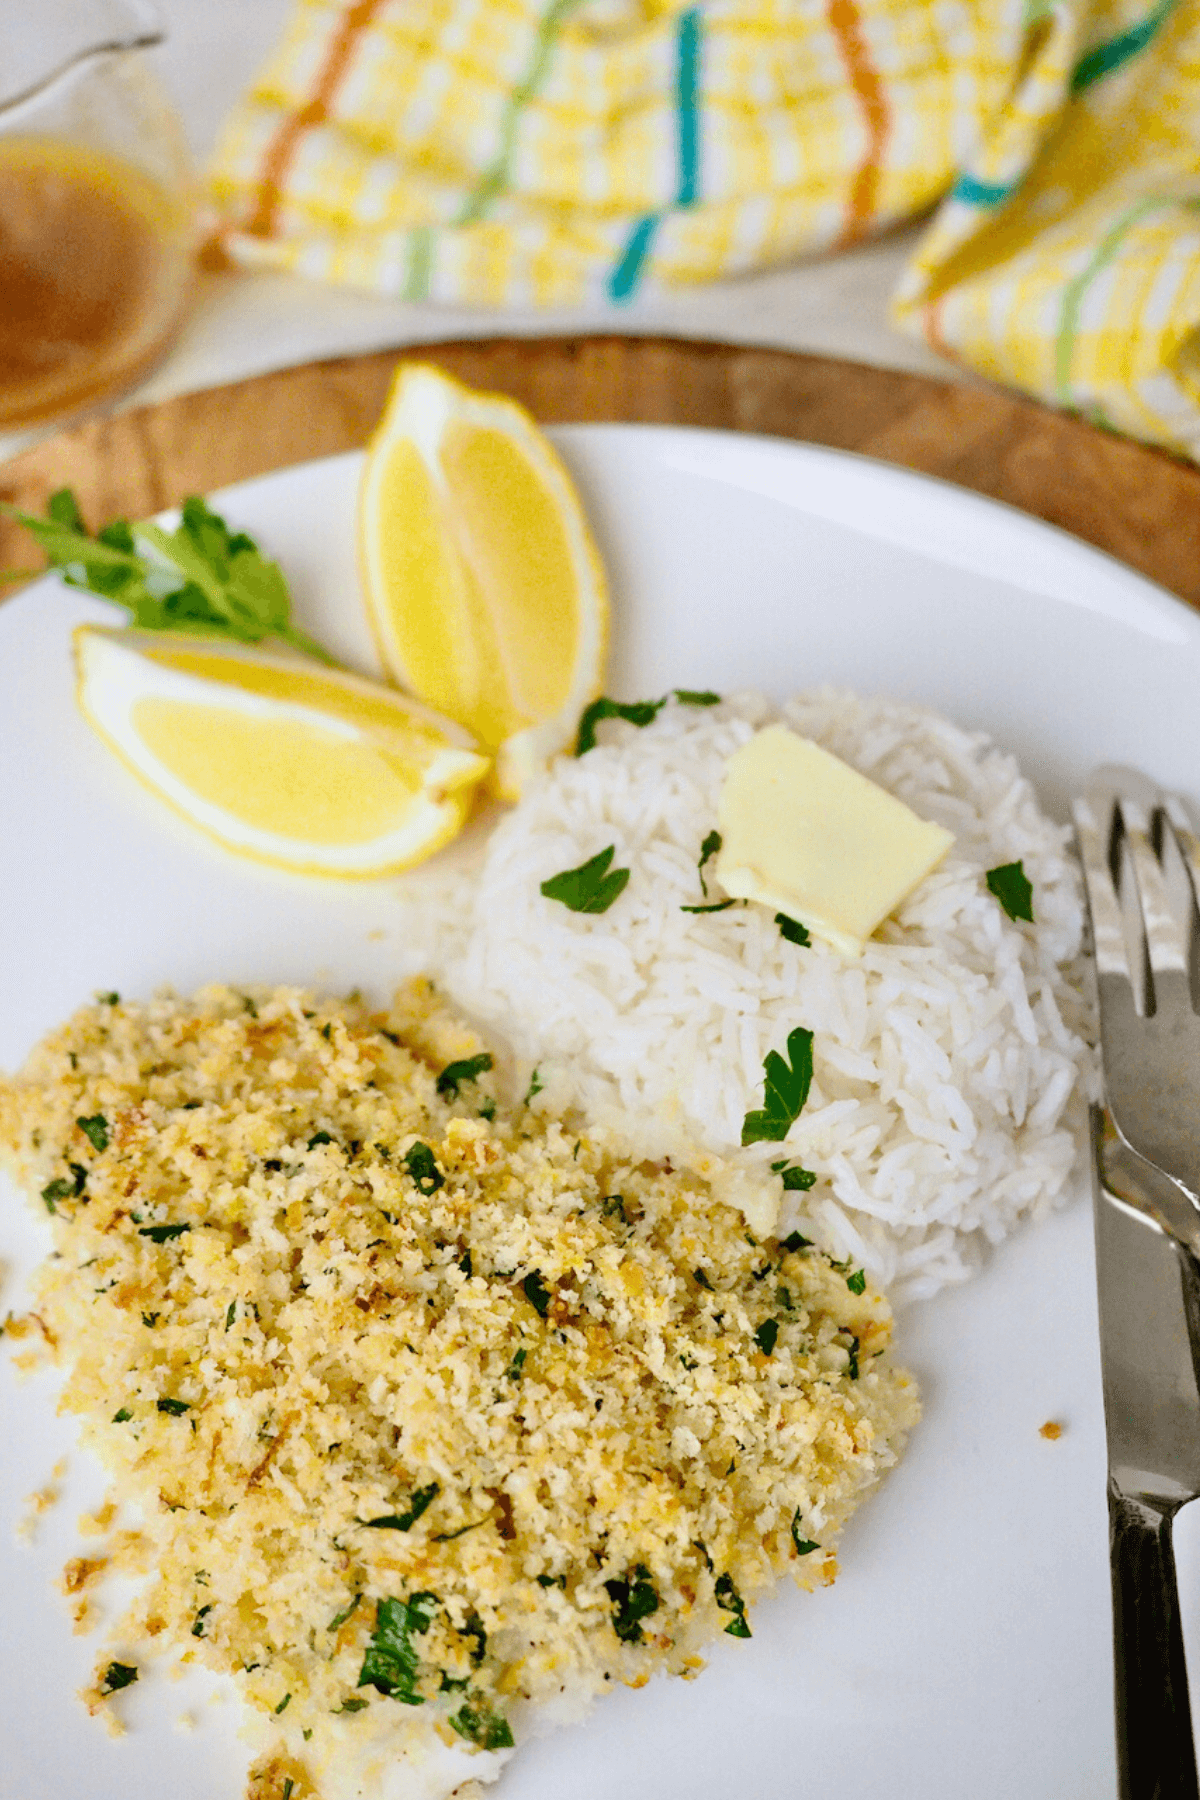 Parmesan panko baked cod recipe on plate with white rice and lemon wedges.